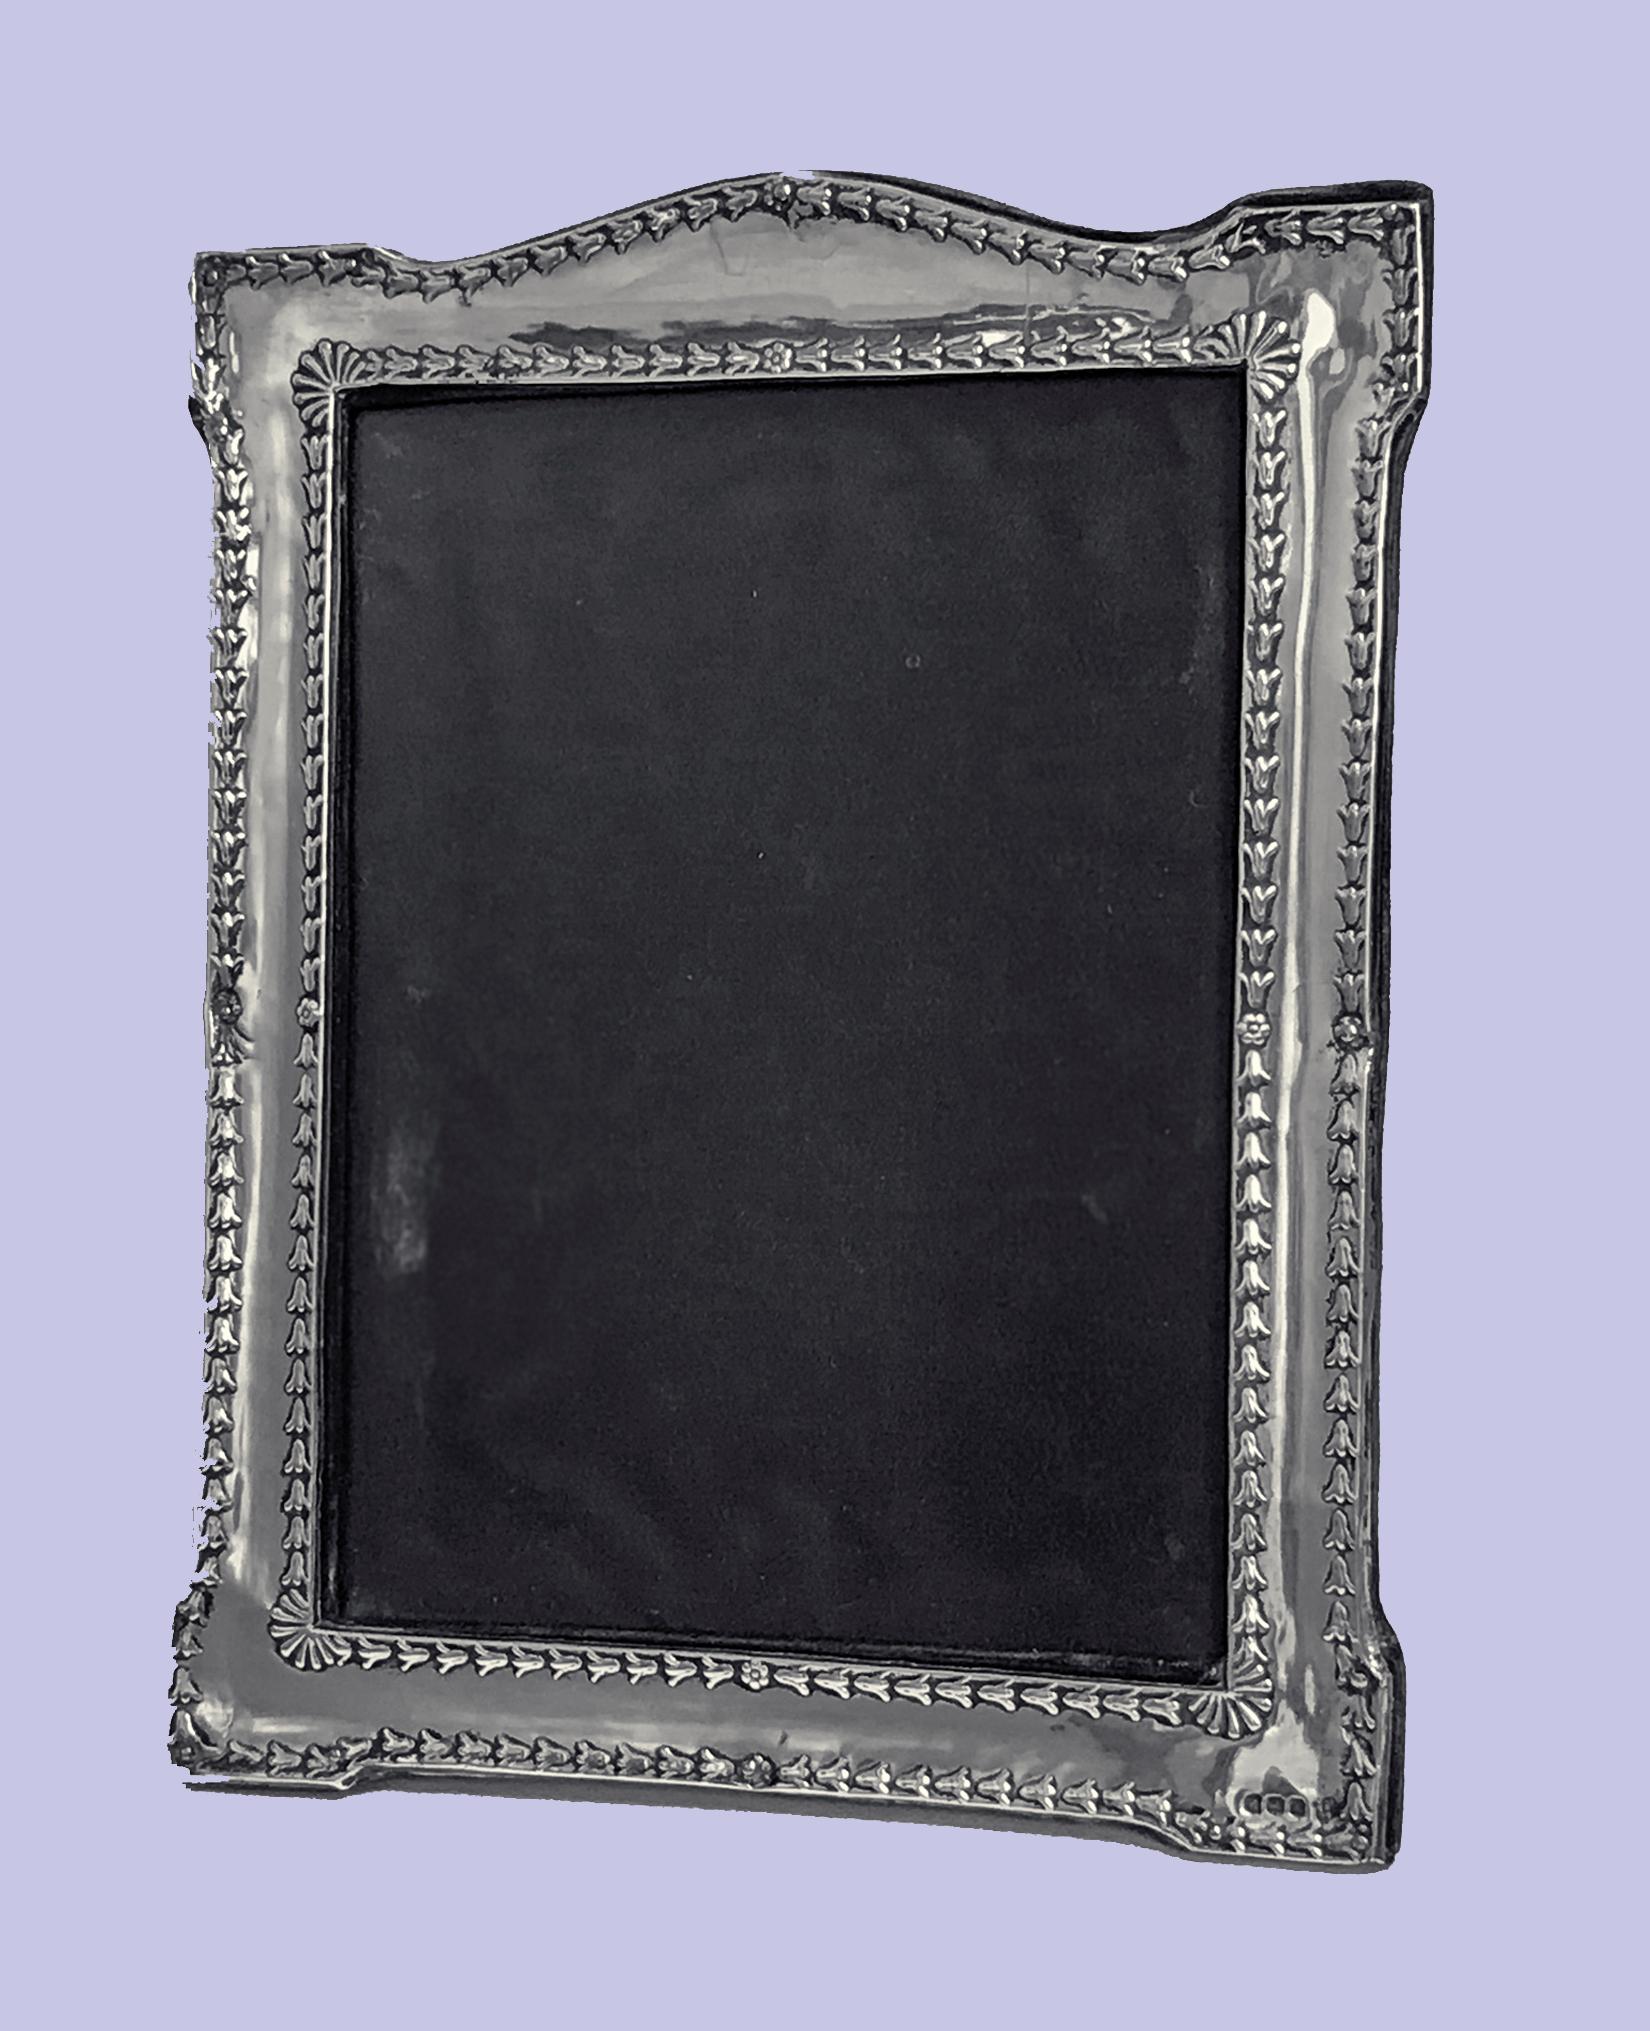 Antique Sterling Silver Photograph Frame, Birmingham 1917, Boots Pure Drug Company. Rectangular shape with with borders of bell drop and shell cornices, otherwise plain, dark velvet back and easel. Minor wear commensurate with age. No splits to